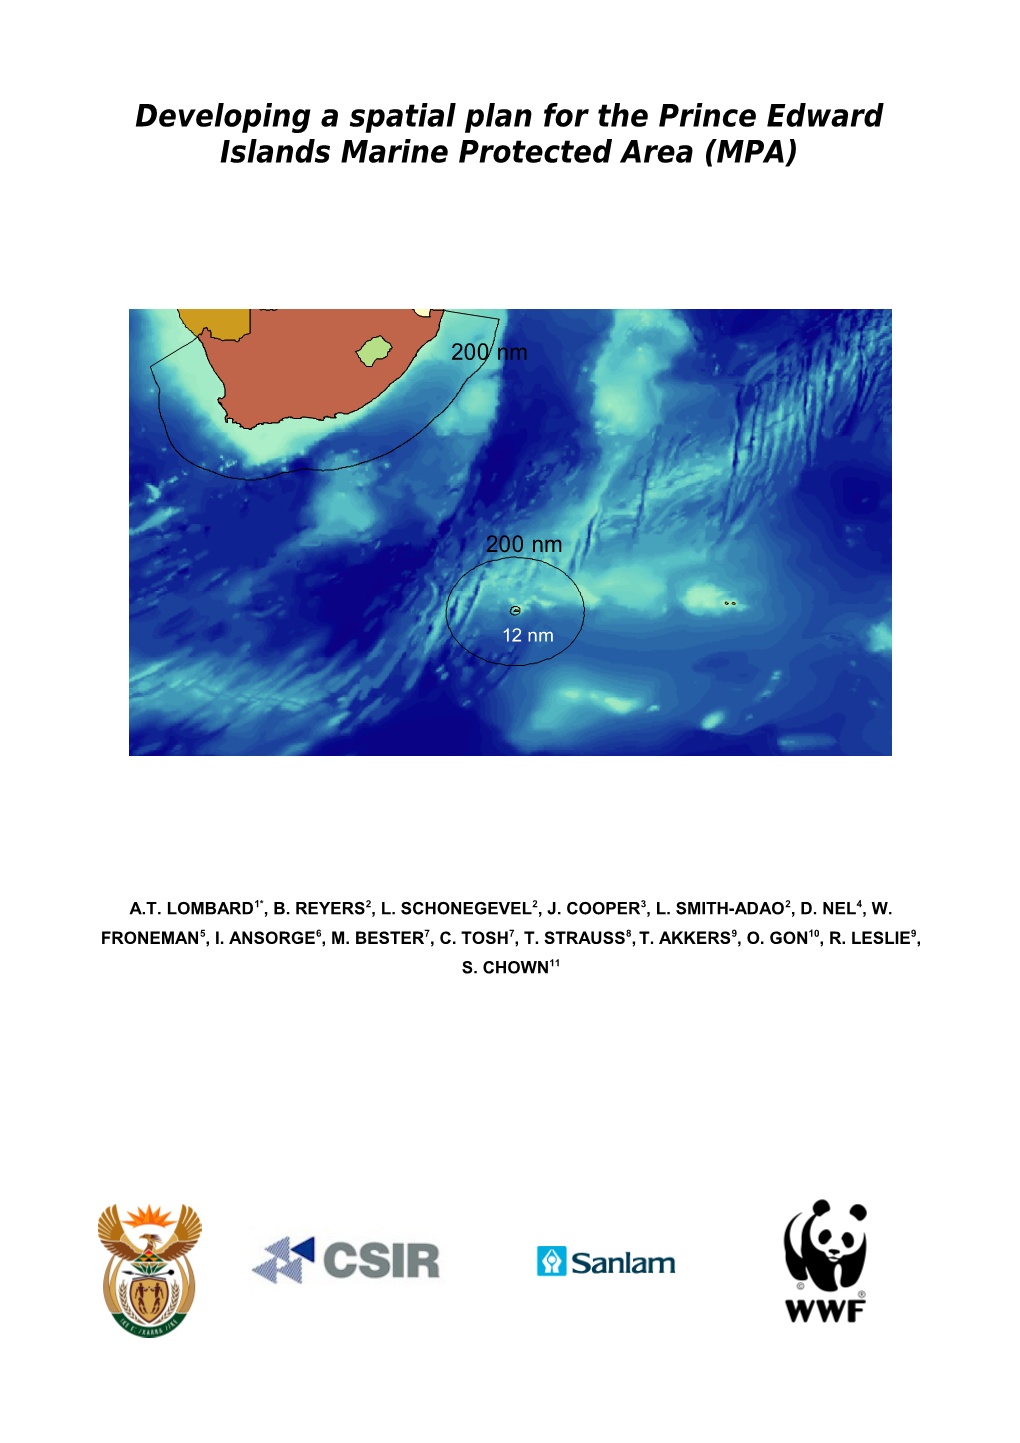 Conserving Pattern and Process in the Southern Ocean: an MPA Design for the Prince Edward